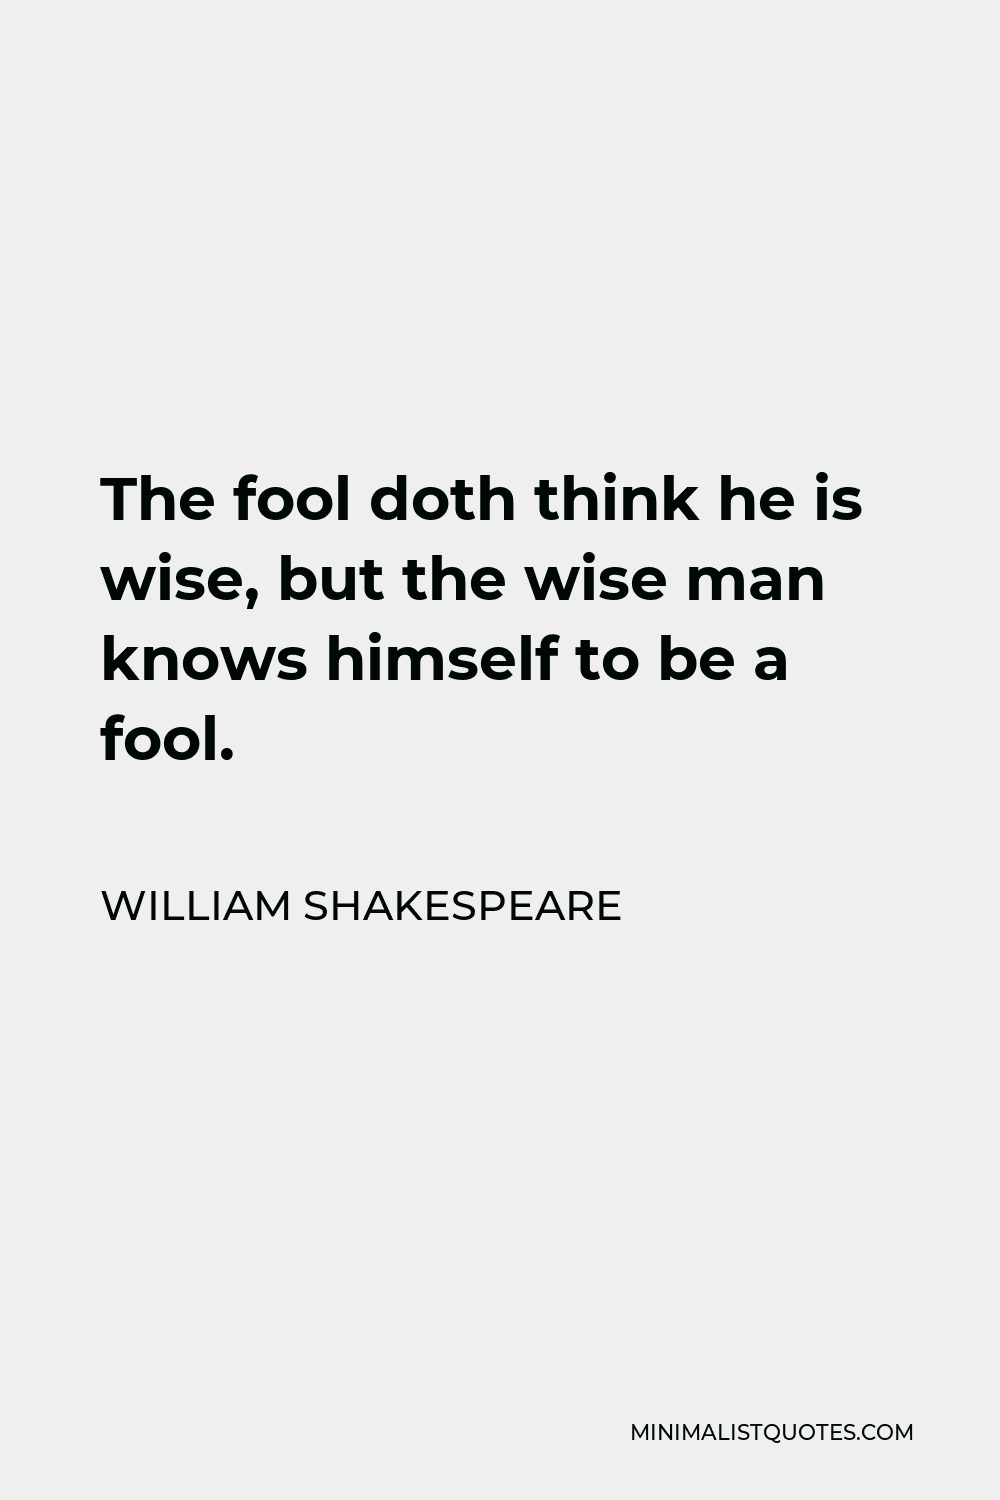 William Shakespeare Quote - The fool doth think he is wise, but the wise man knows himself to be a fool.